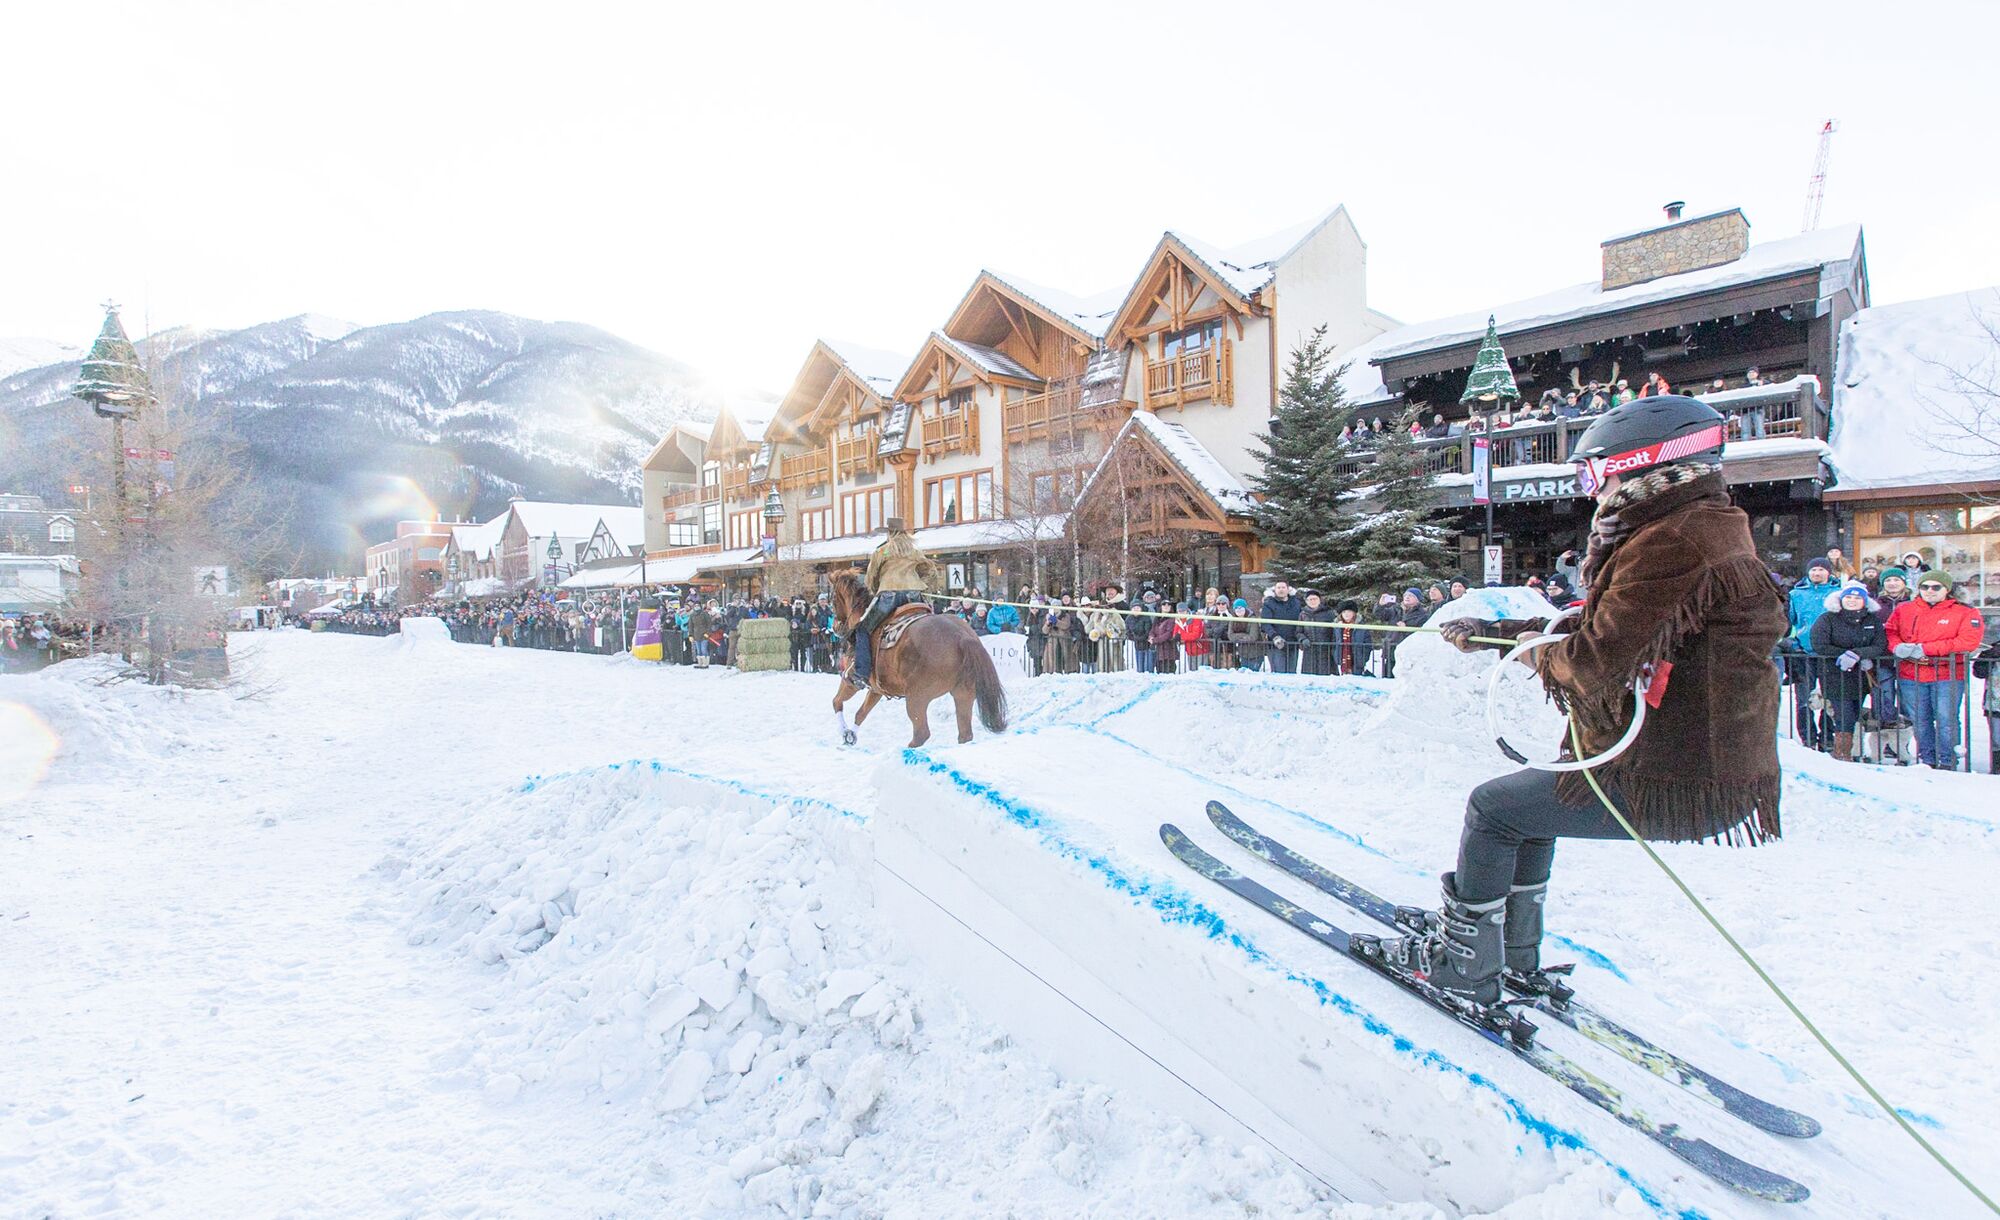 A skier is drawn by a horse during Snow Days Skijoring event on Banff Avenue